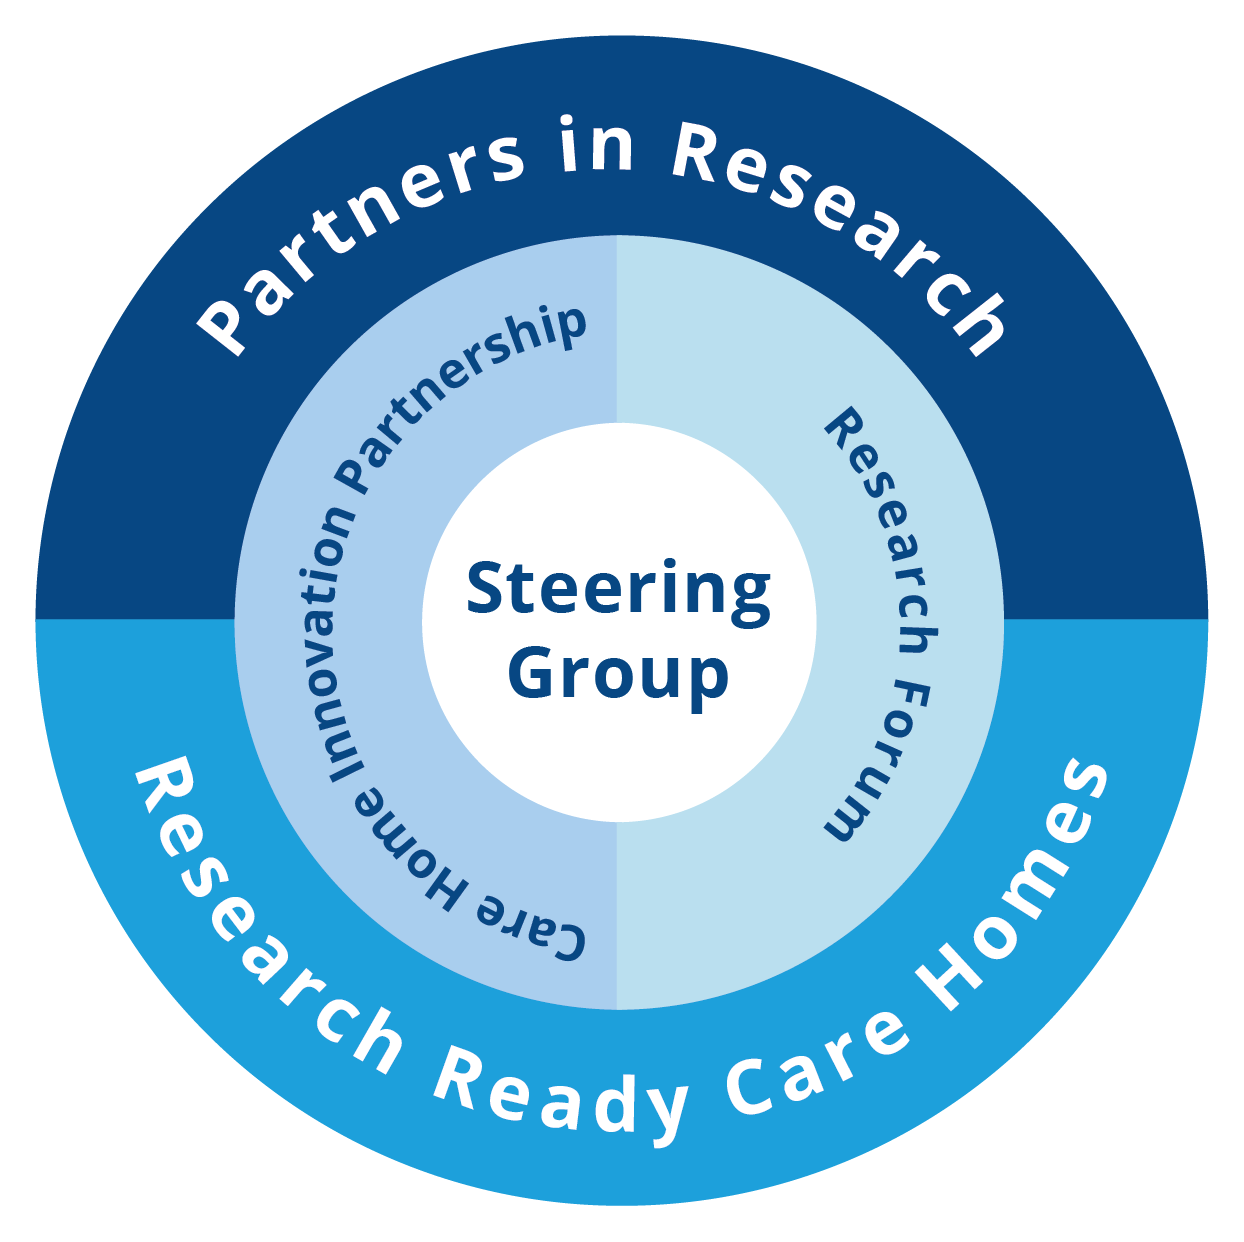 Graphic showing the layers of ENRICH Scotland resources - Partners in Research, Research Ready care Homes, Research Forum, Care Home Innovation Partnership, and Steering Group